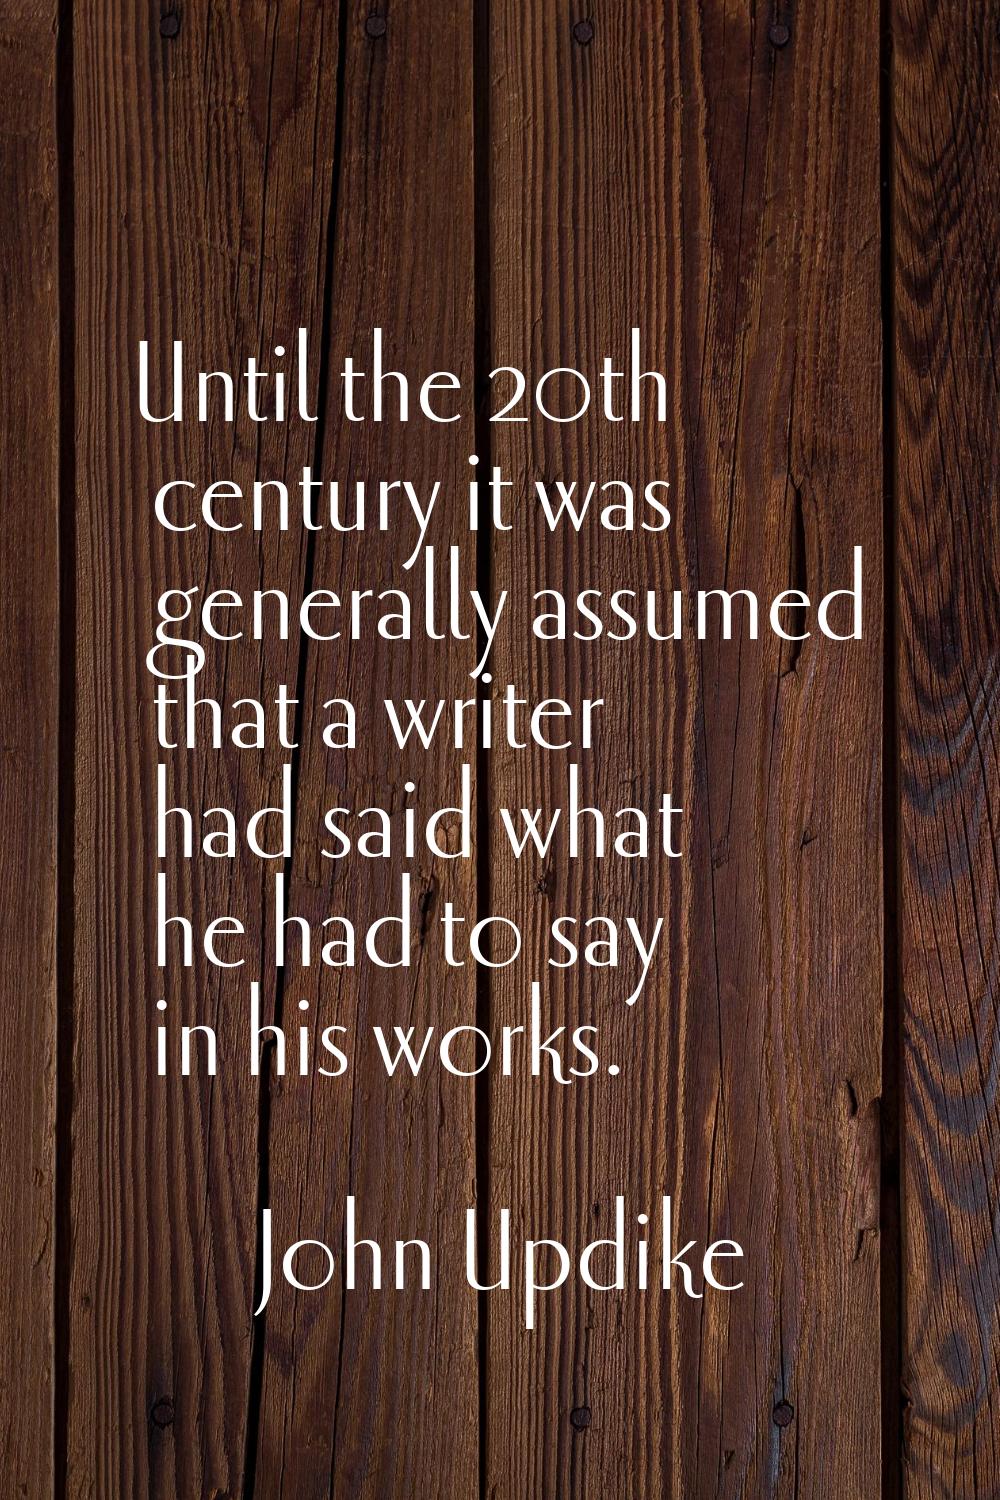 Until the 20th century it was generally assumed that a writer had said what he had to say in his wo